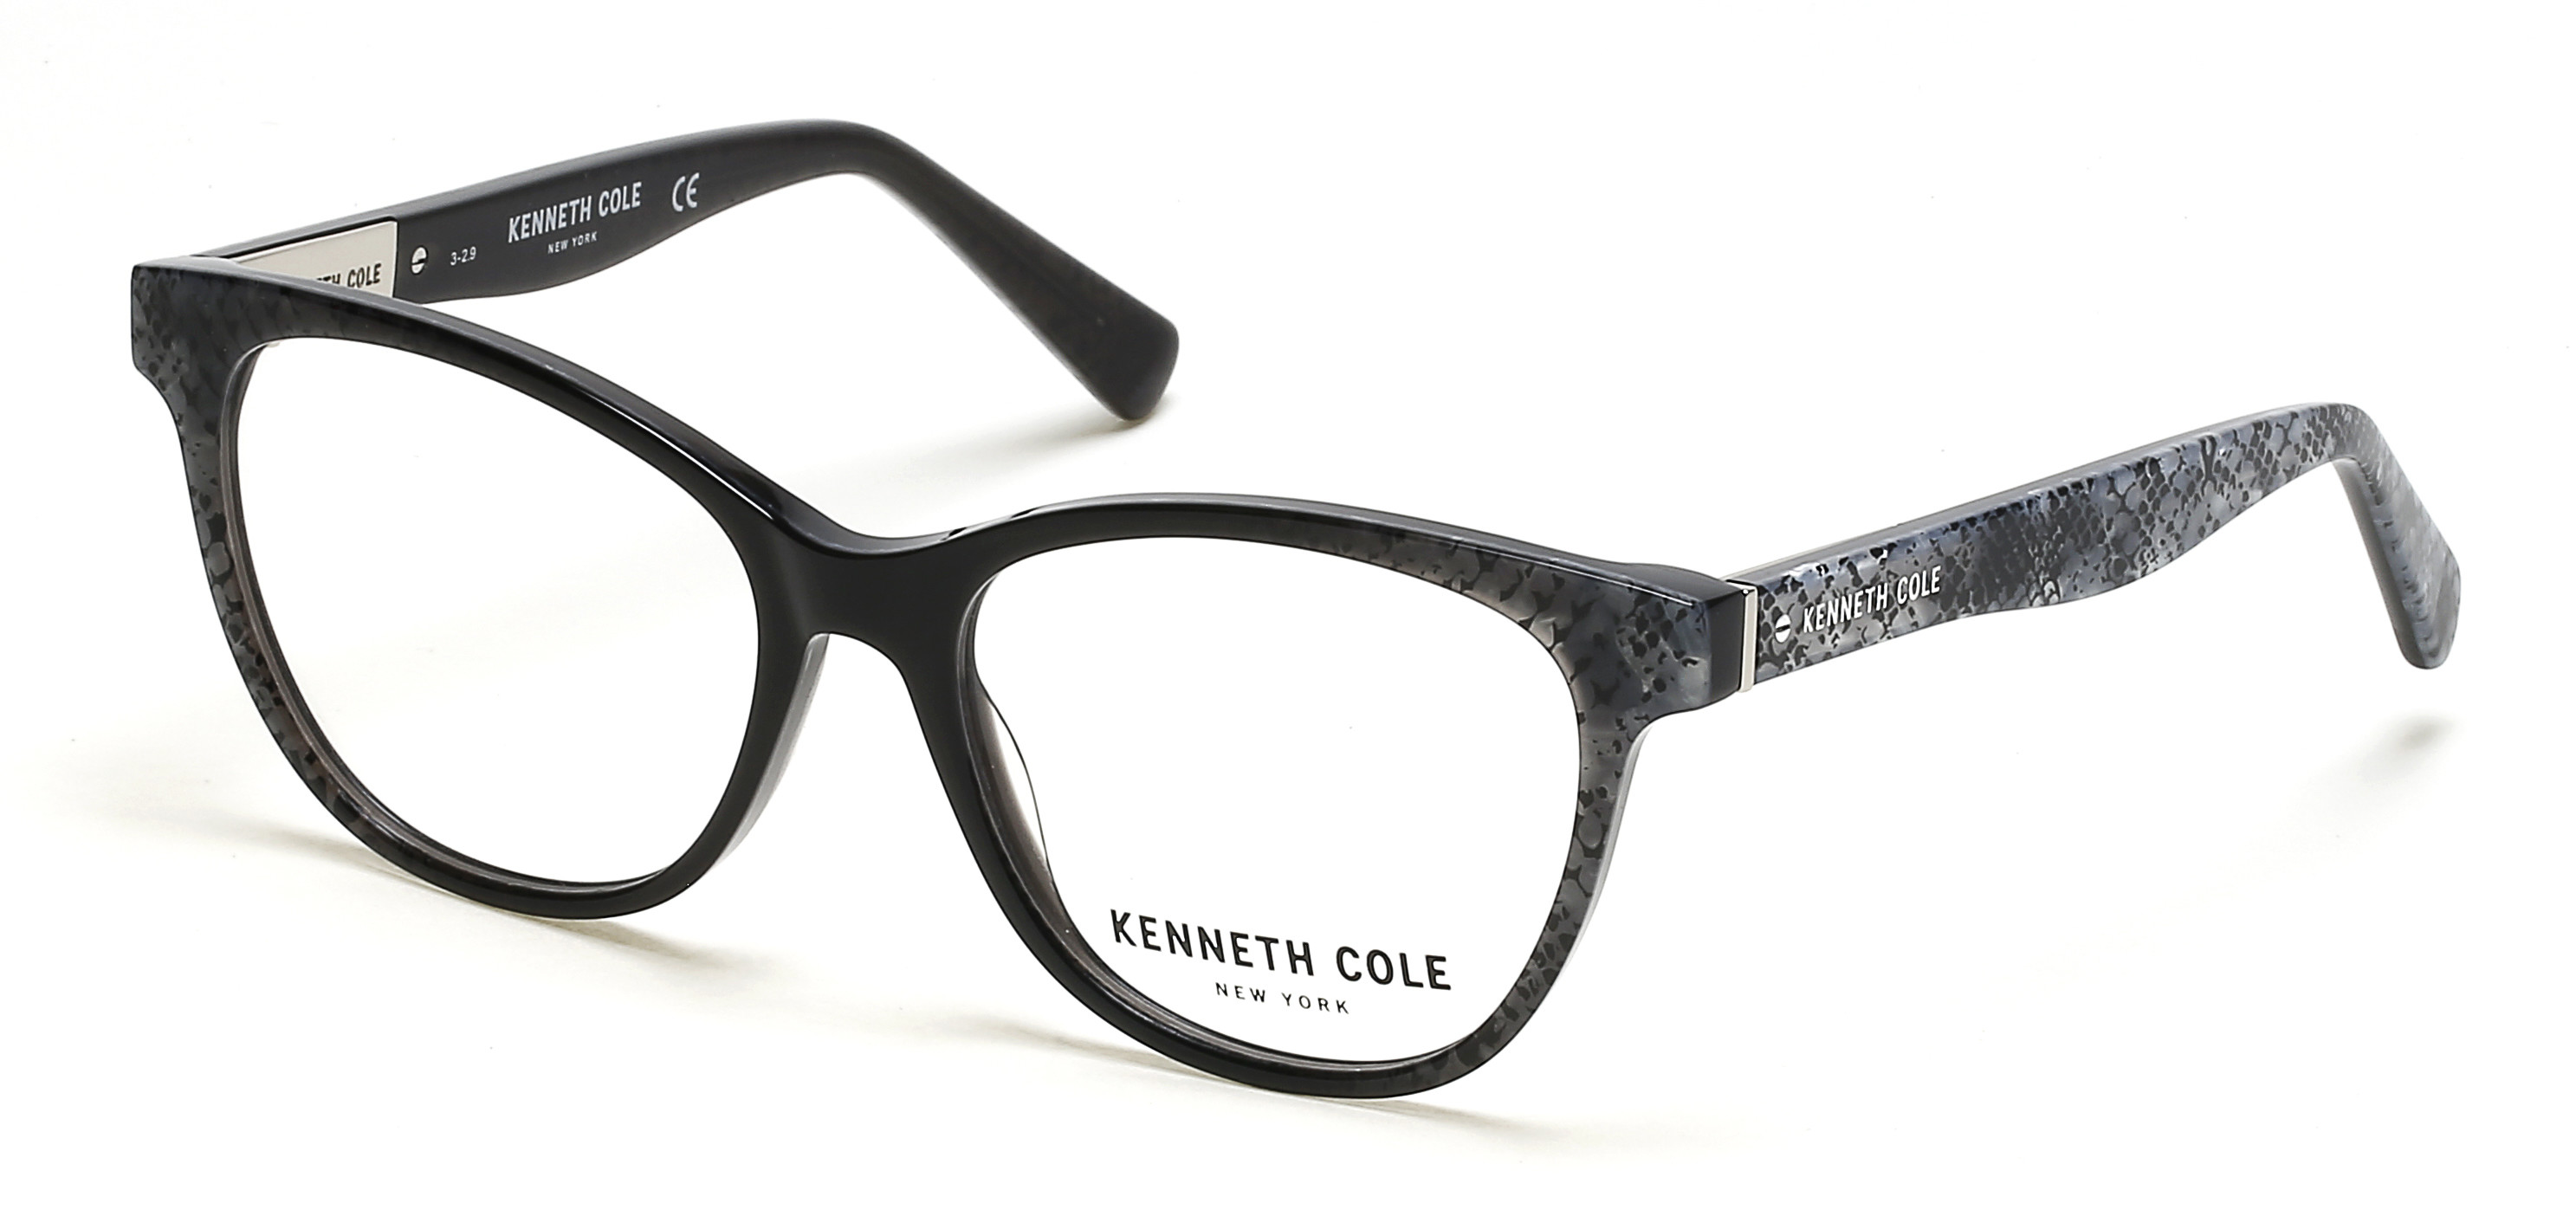 KENNETH COLE NY 0316